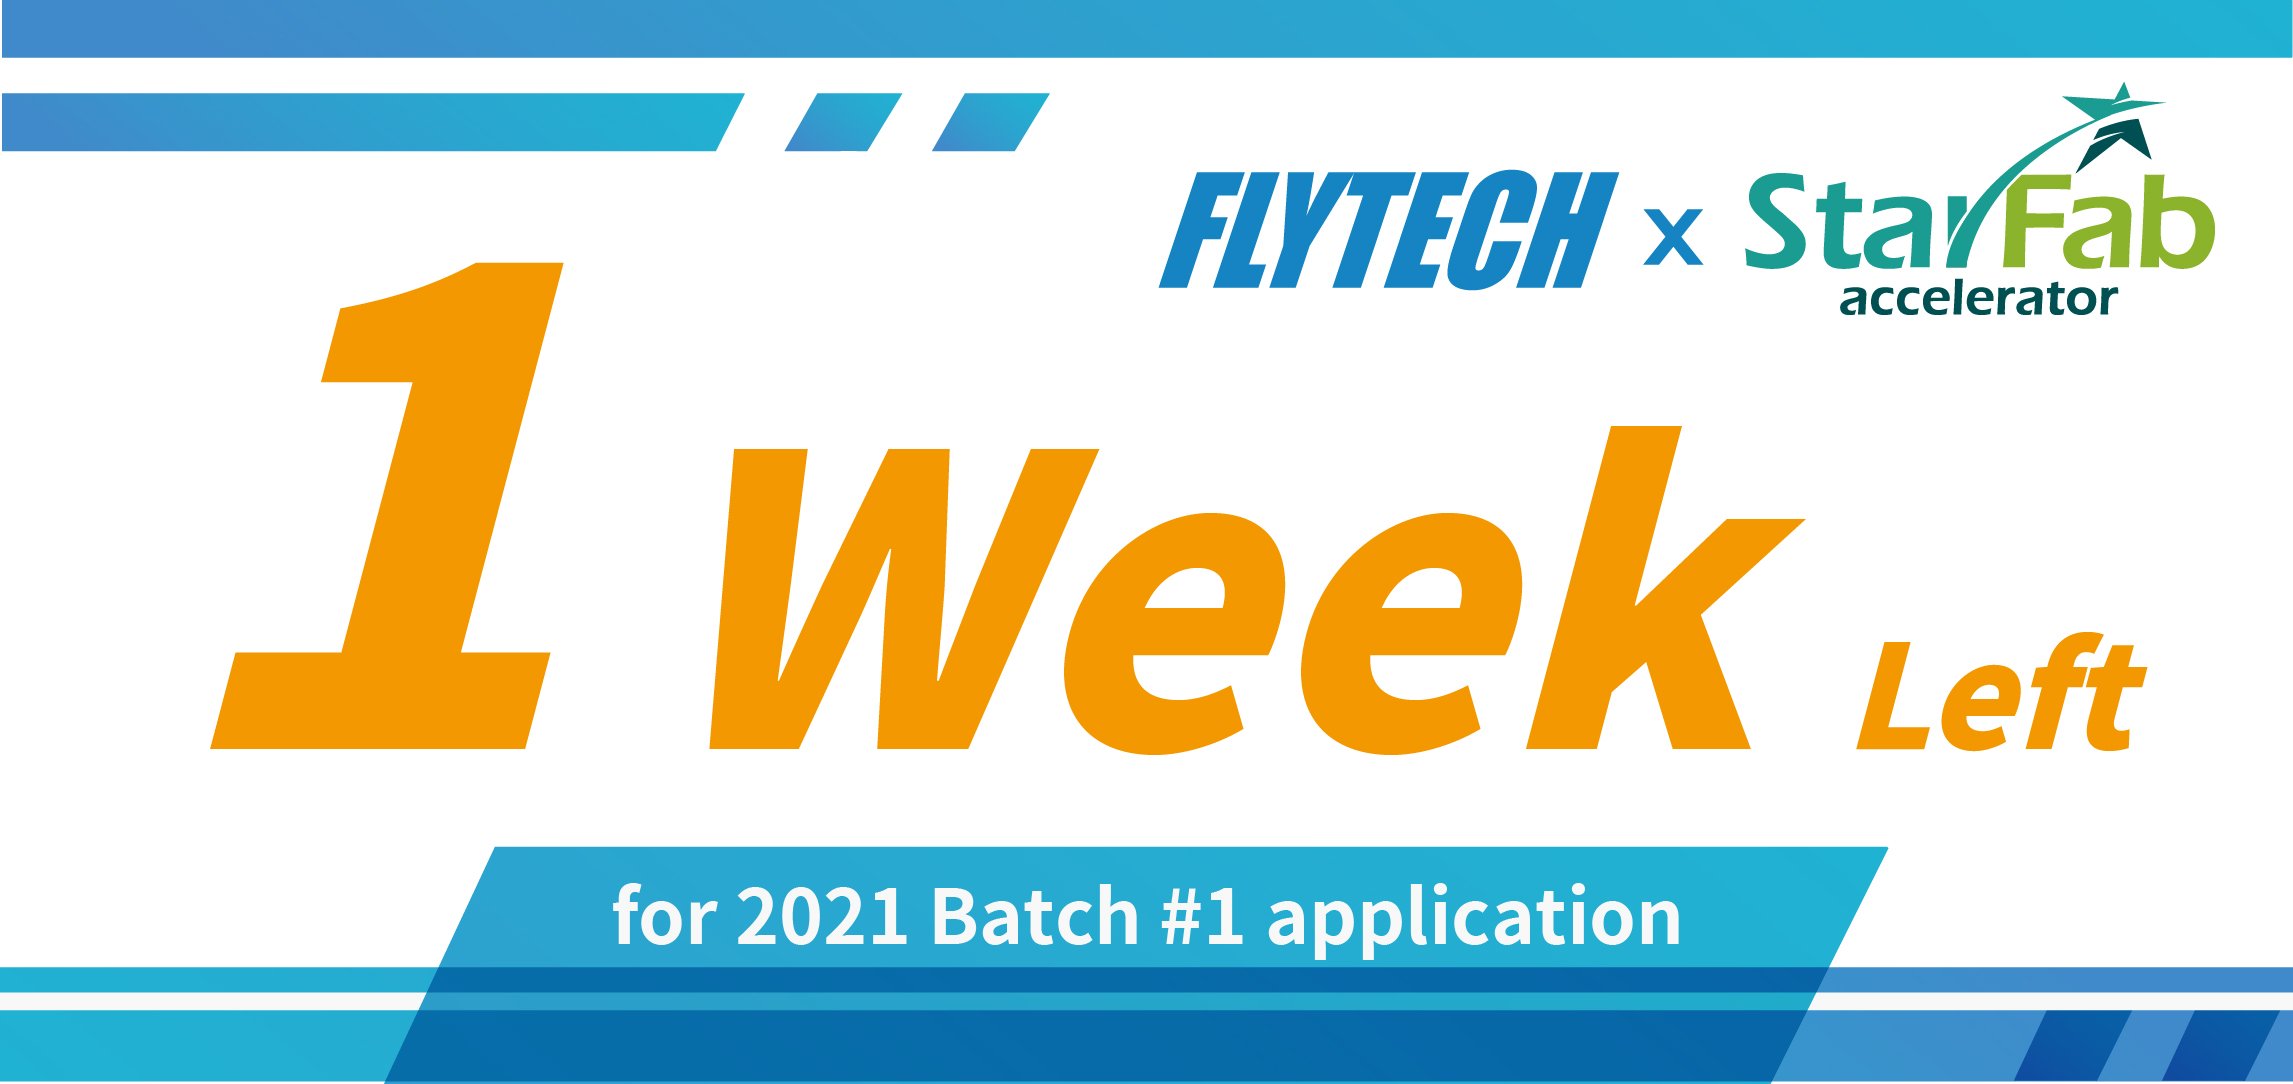 2021 Flytech x StarFab Accelerator is Calling for Applications until June 3